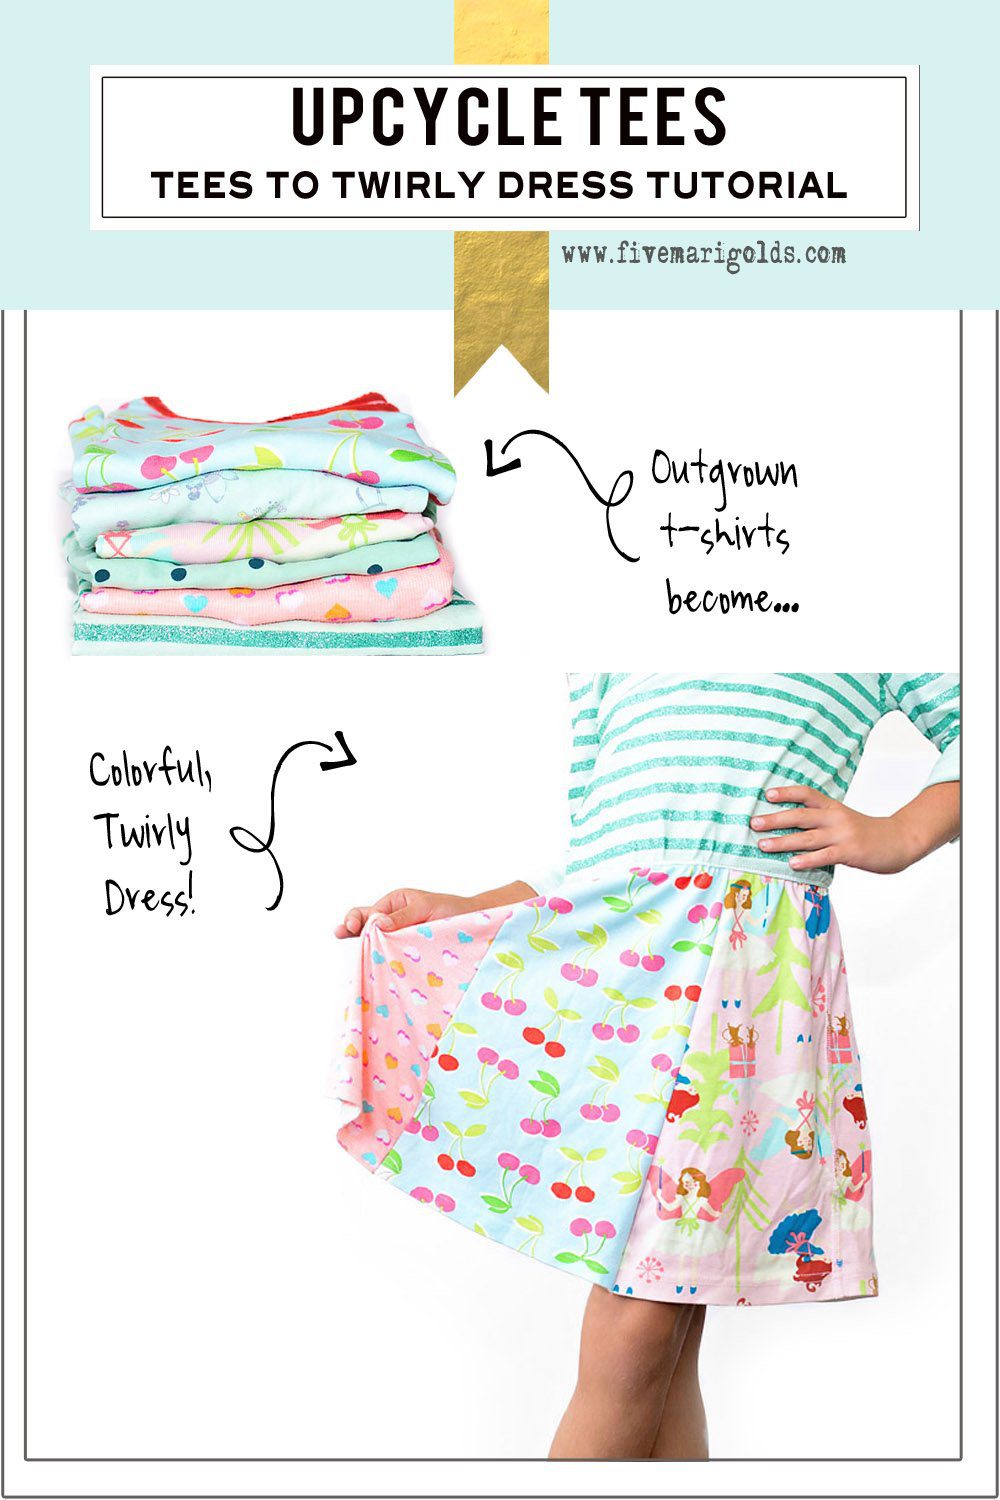 I love this! Upcycle outgrown tees to create a custom dress for girls.